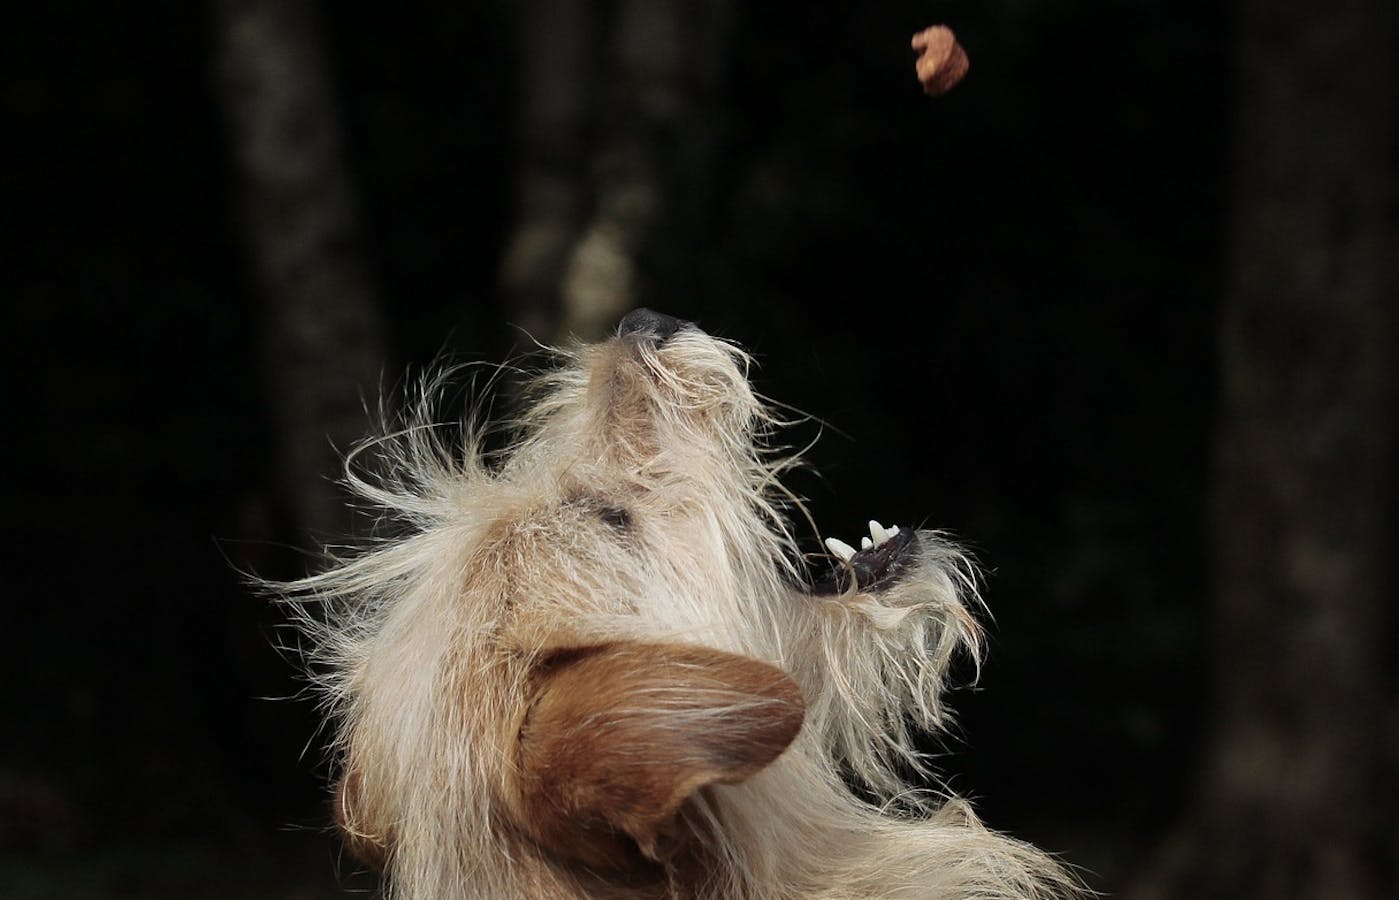 Doggo catching treat in the air 